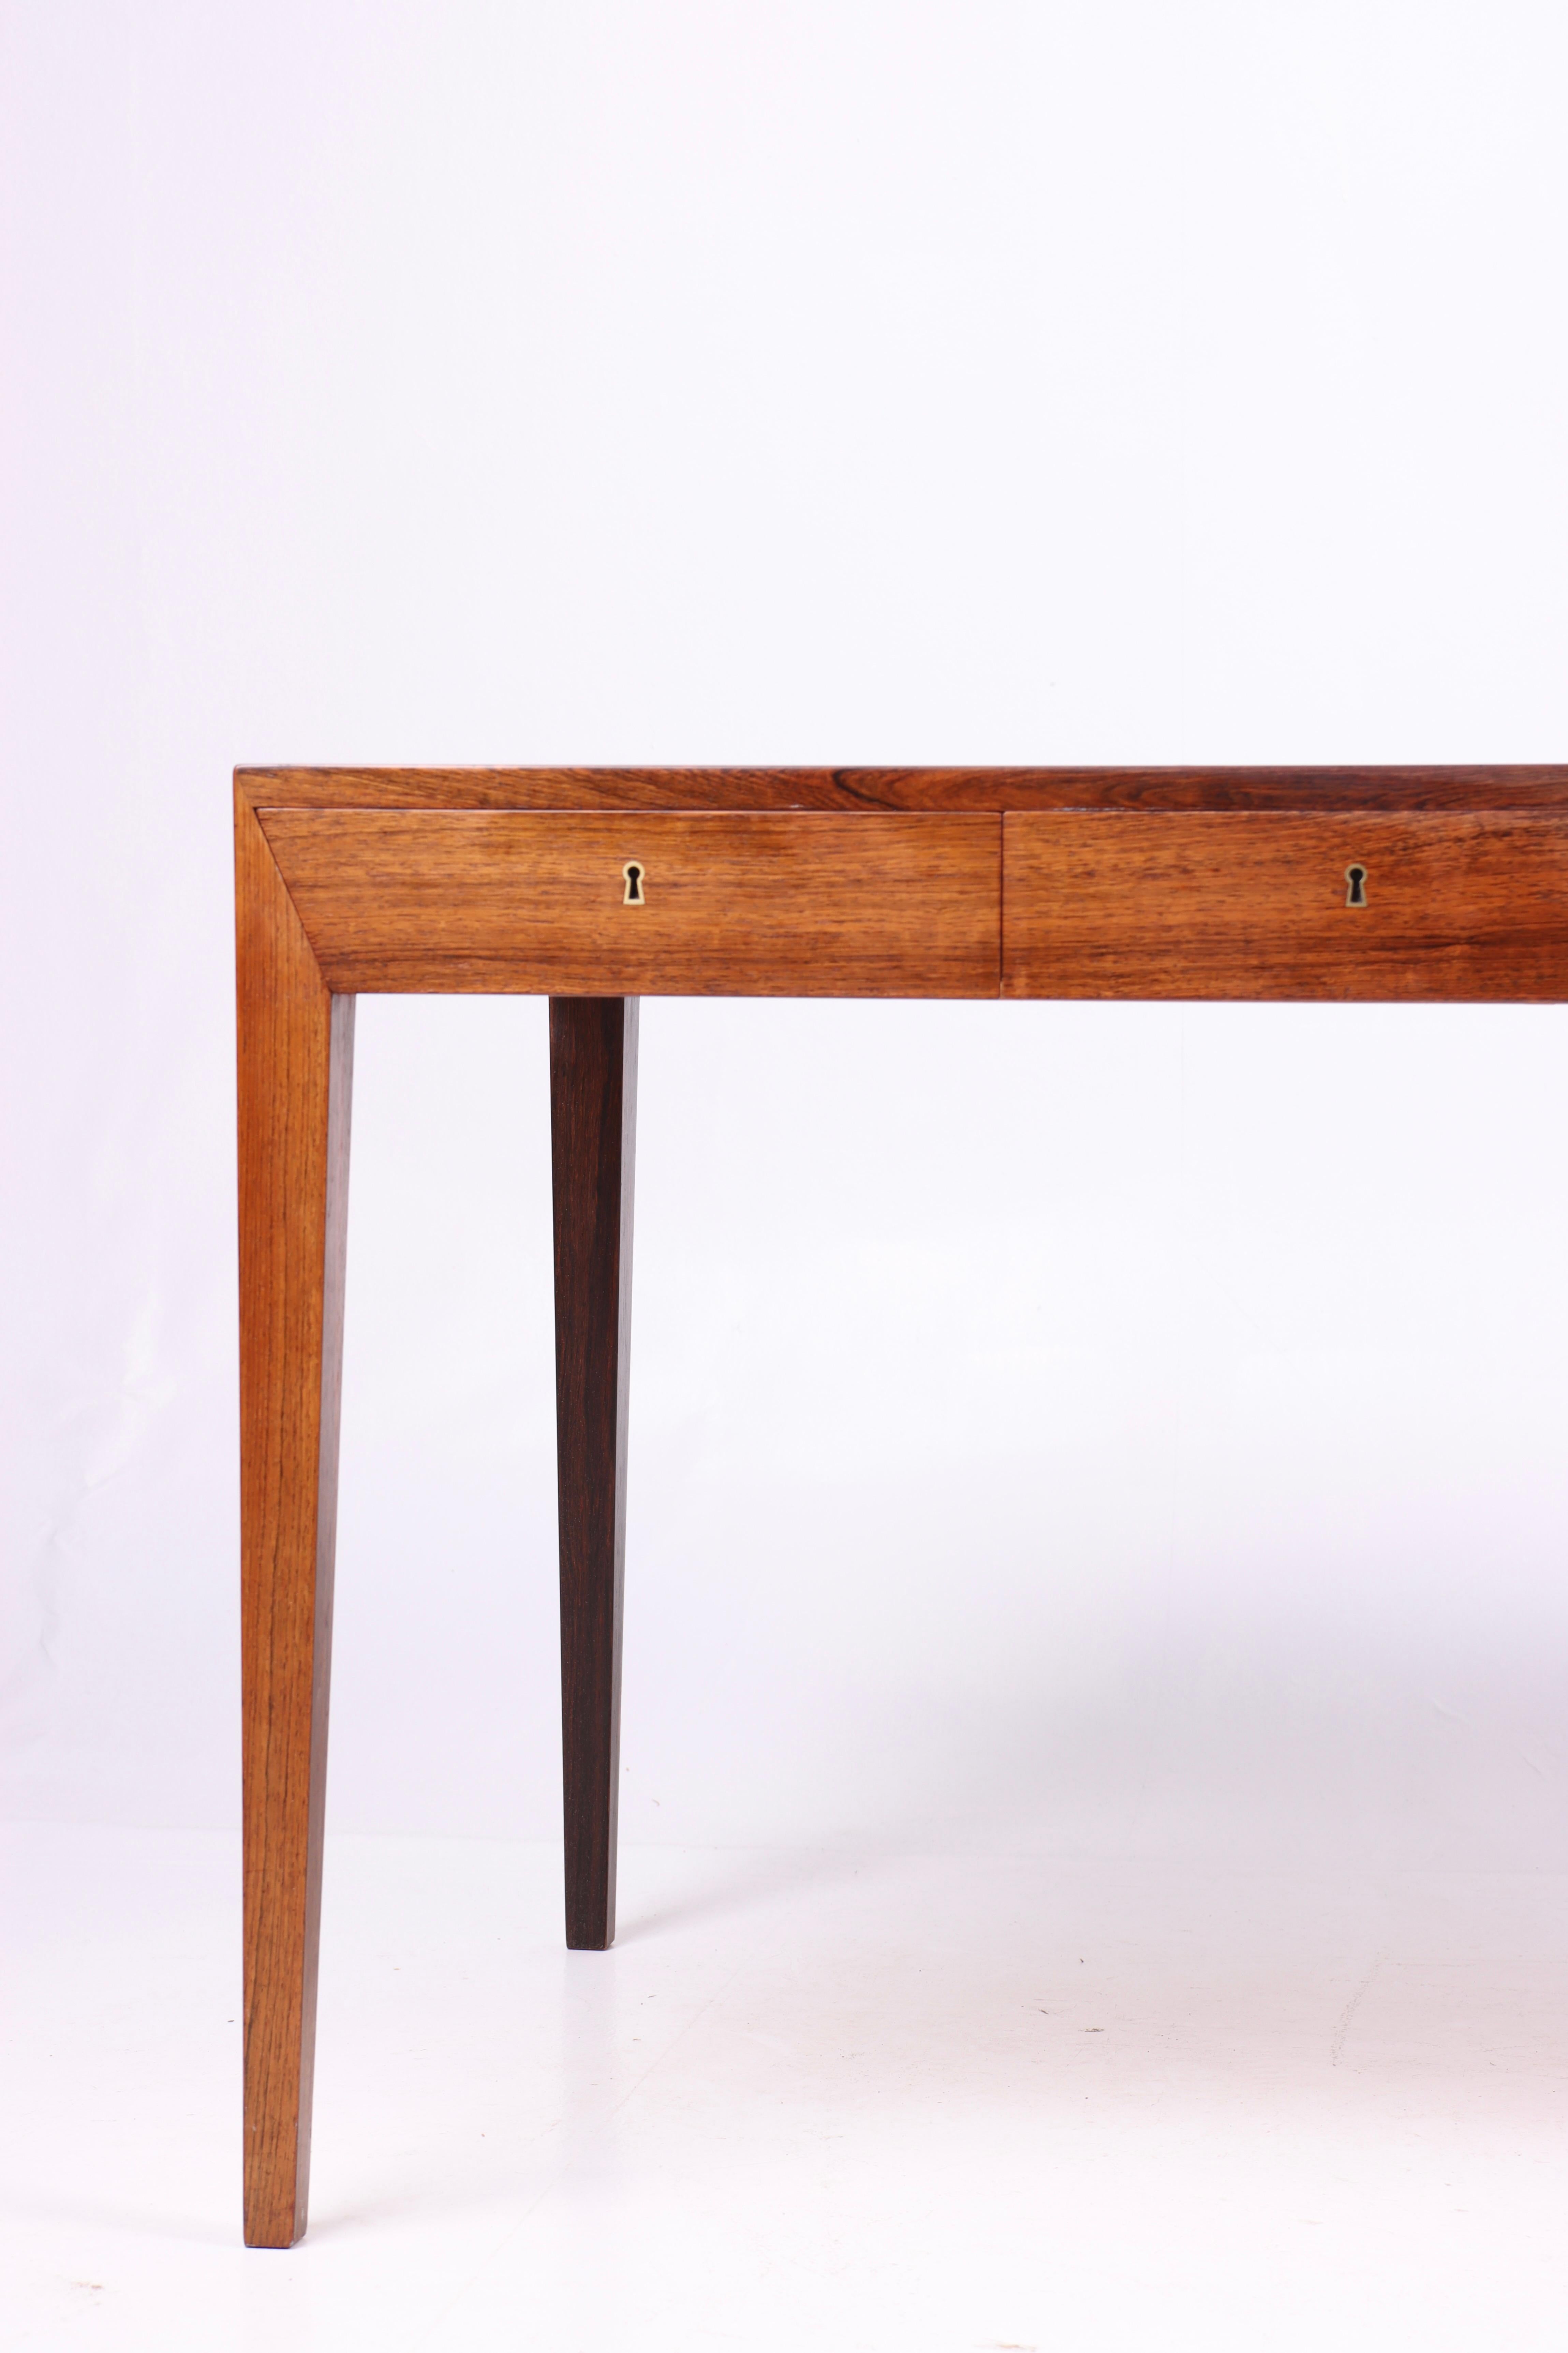 This desk is an iconic example of Danish midcentury design, created by the talented designer Severin Hansen and manufactured by the renowned Haslev Møbelfabrik in the 1950s. The desk is constructed from premium rosewood, characterized by its rich